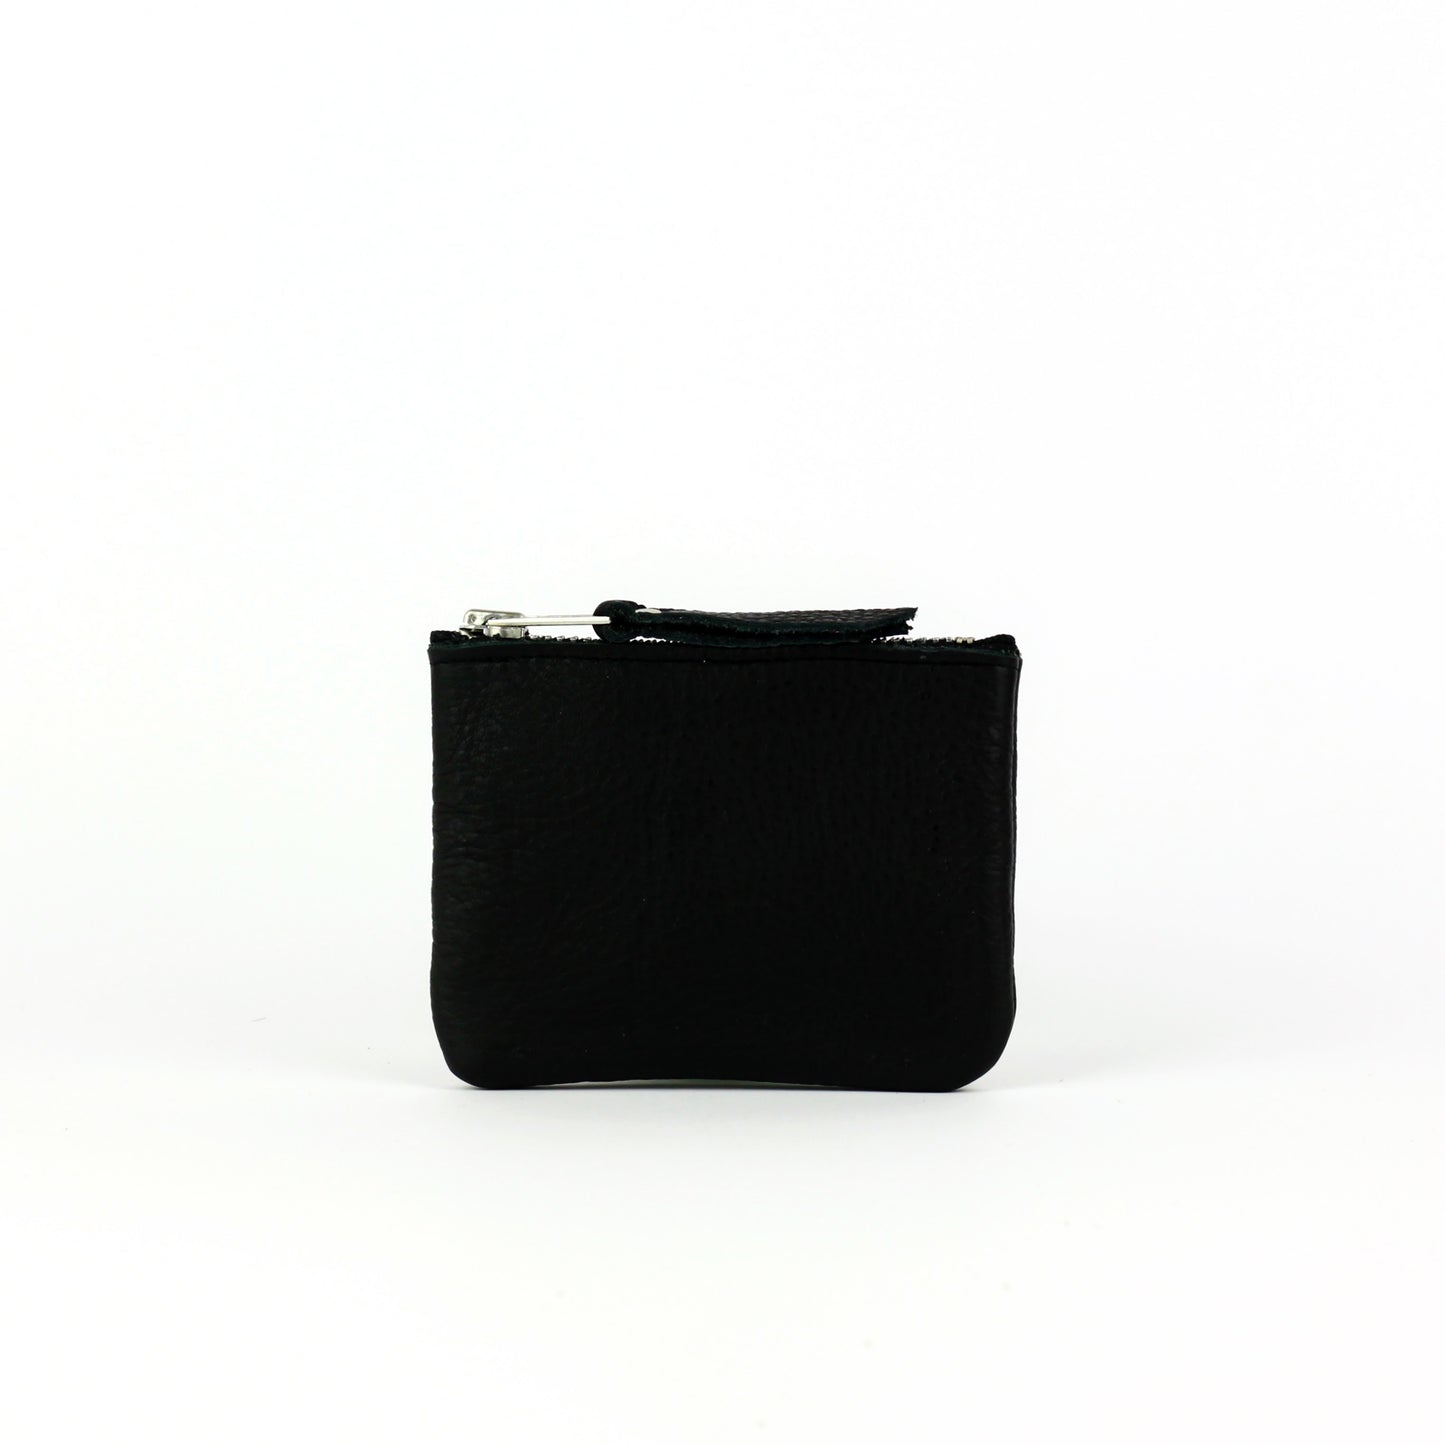 Black Leather Coin Purse